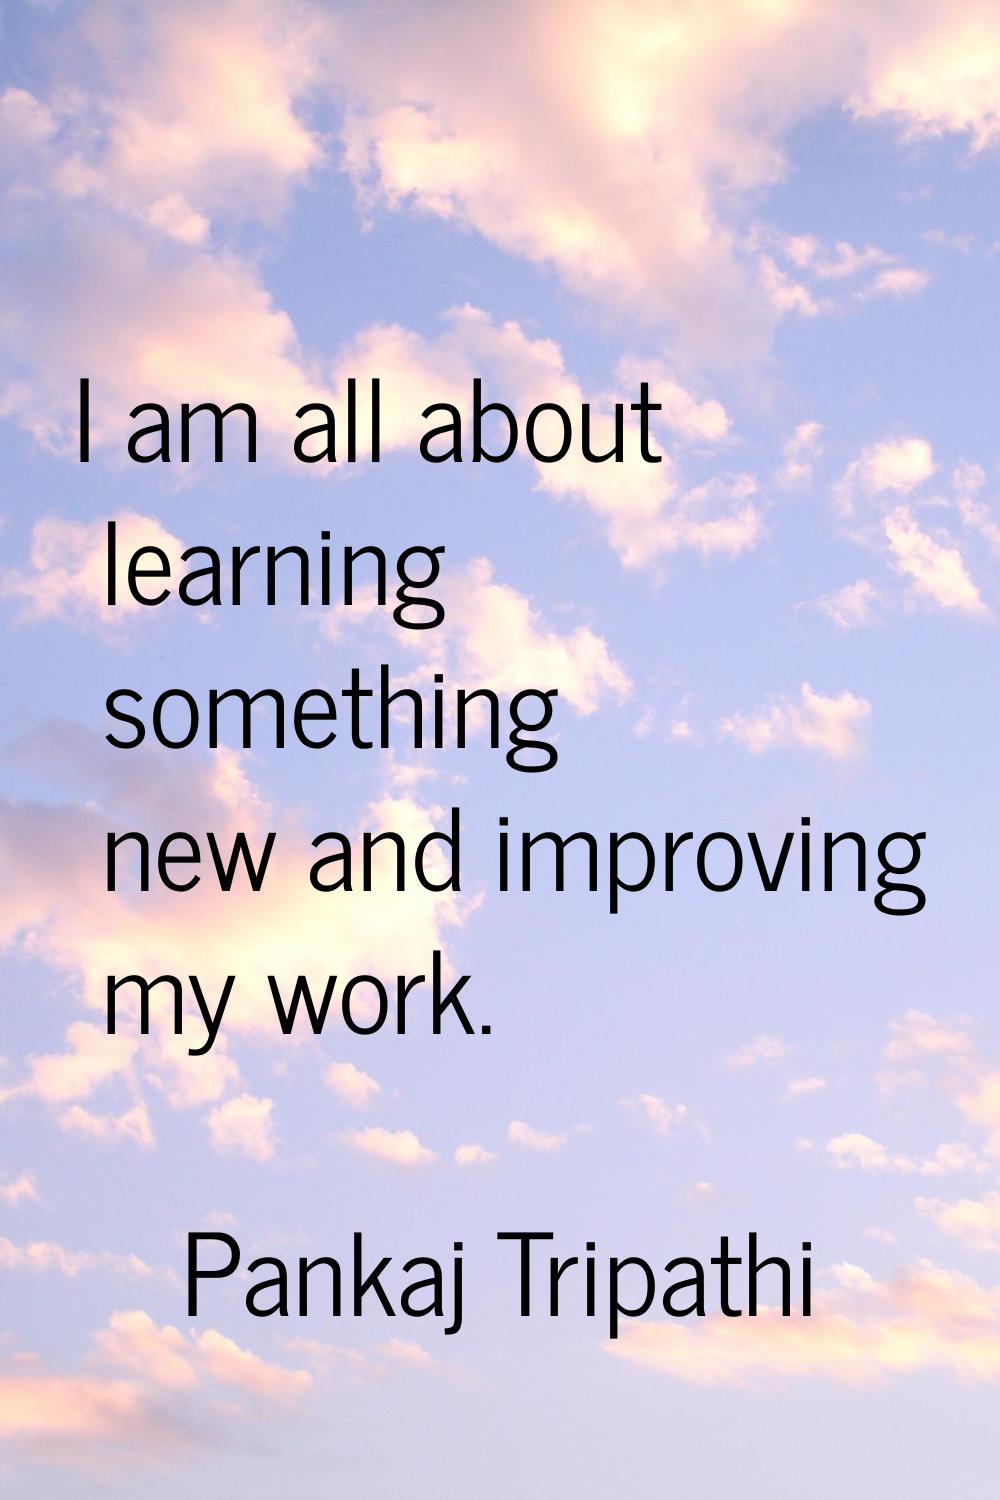 I am all about learning something new and improving my work.